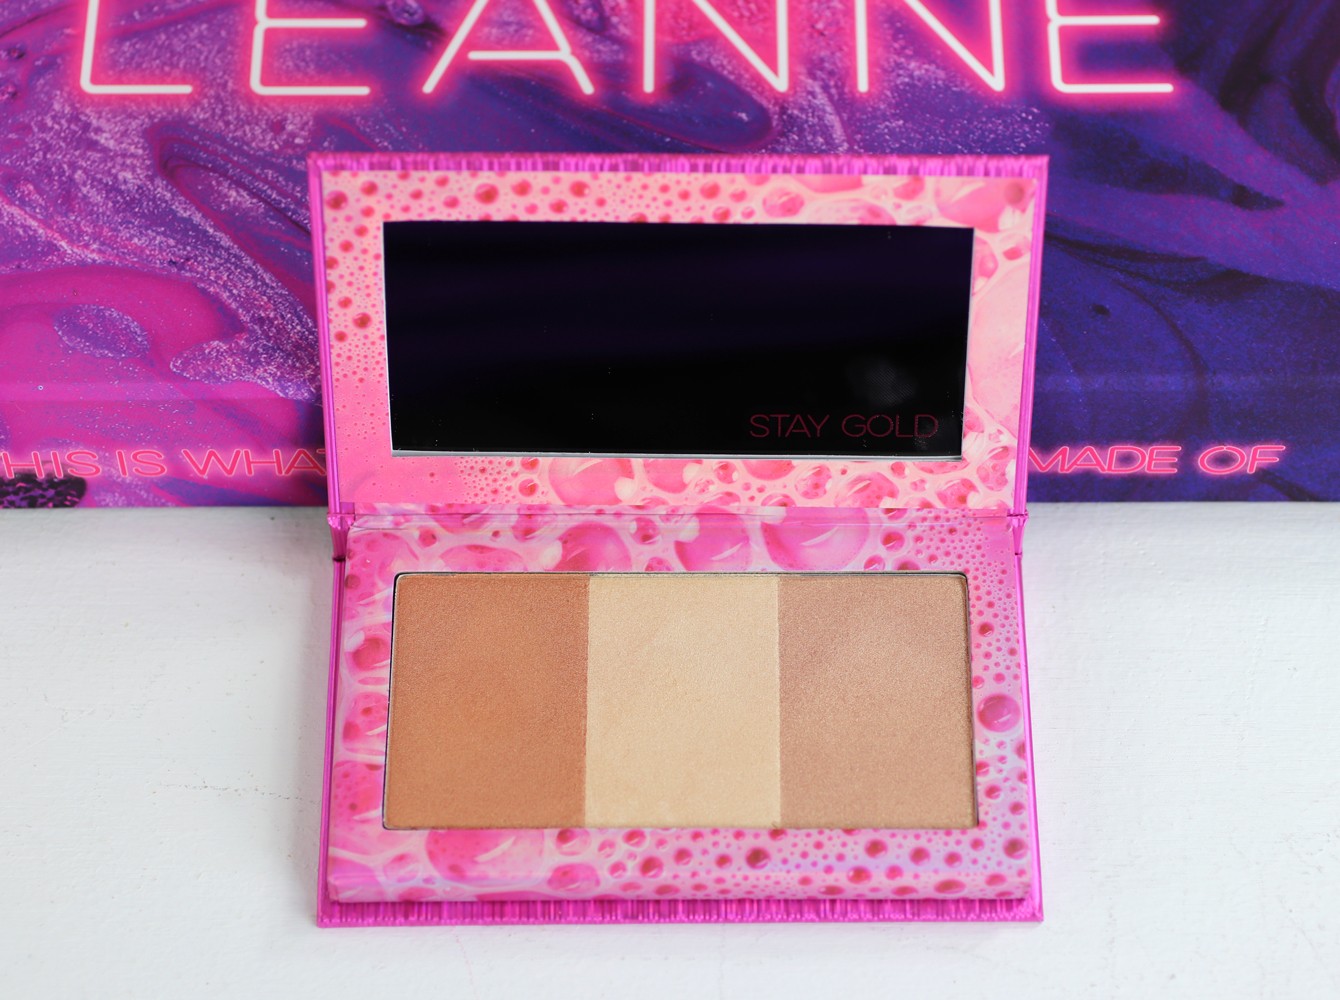 Urban Decay x Kristen Leanne Beauty Beam Highlighter Palette Review and Swatches by popular Los Angeles beauty blogger My Beauty Bunny